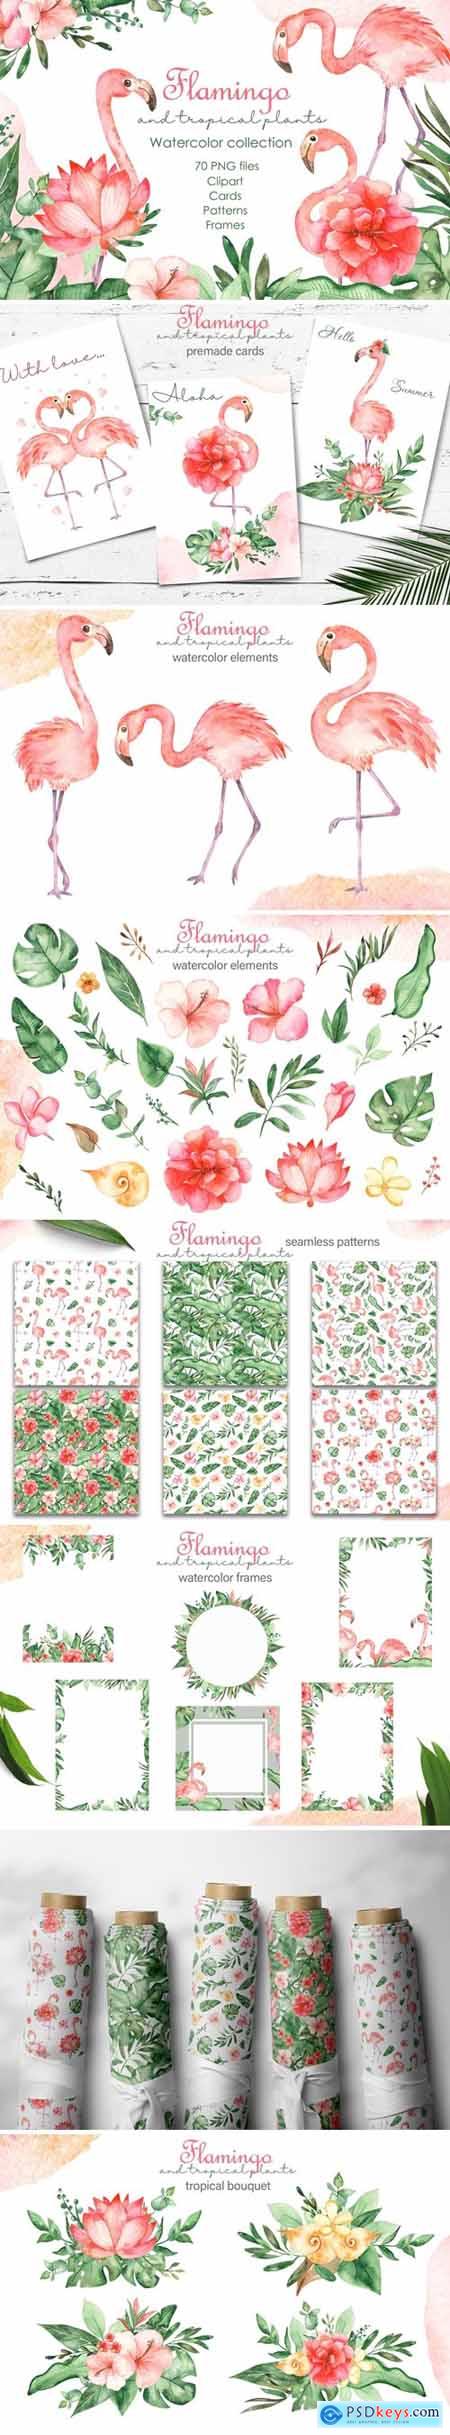 Flowers, Trees and Leaves » page 11 » Free Download Photoshop Vector ...